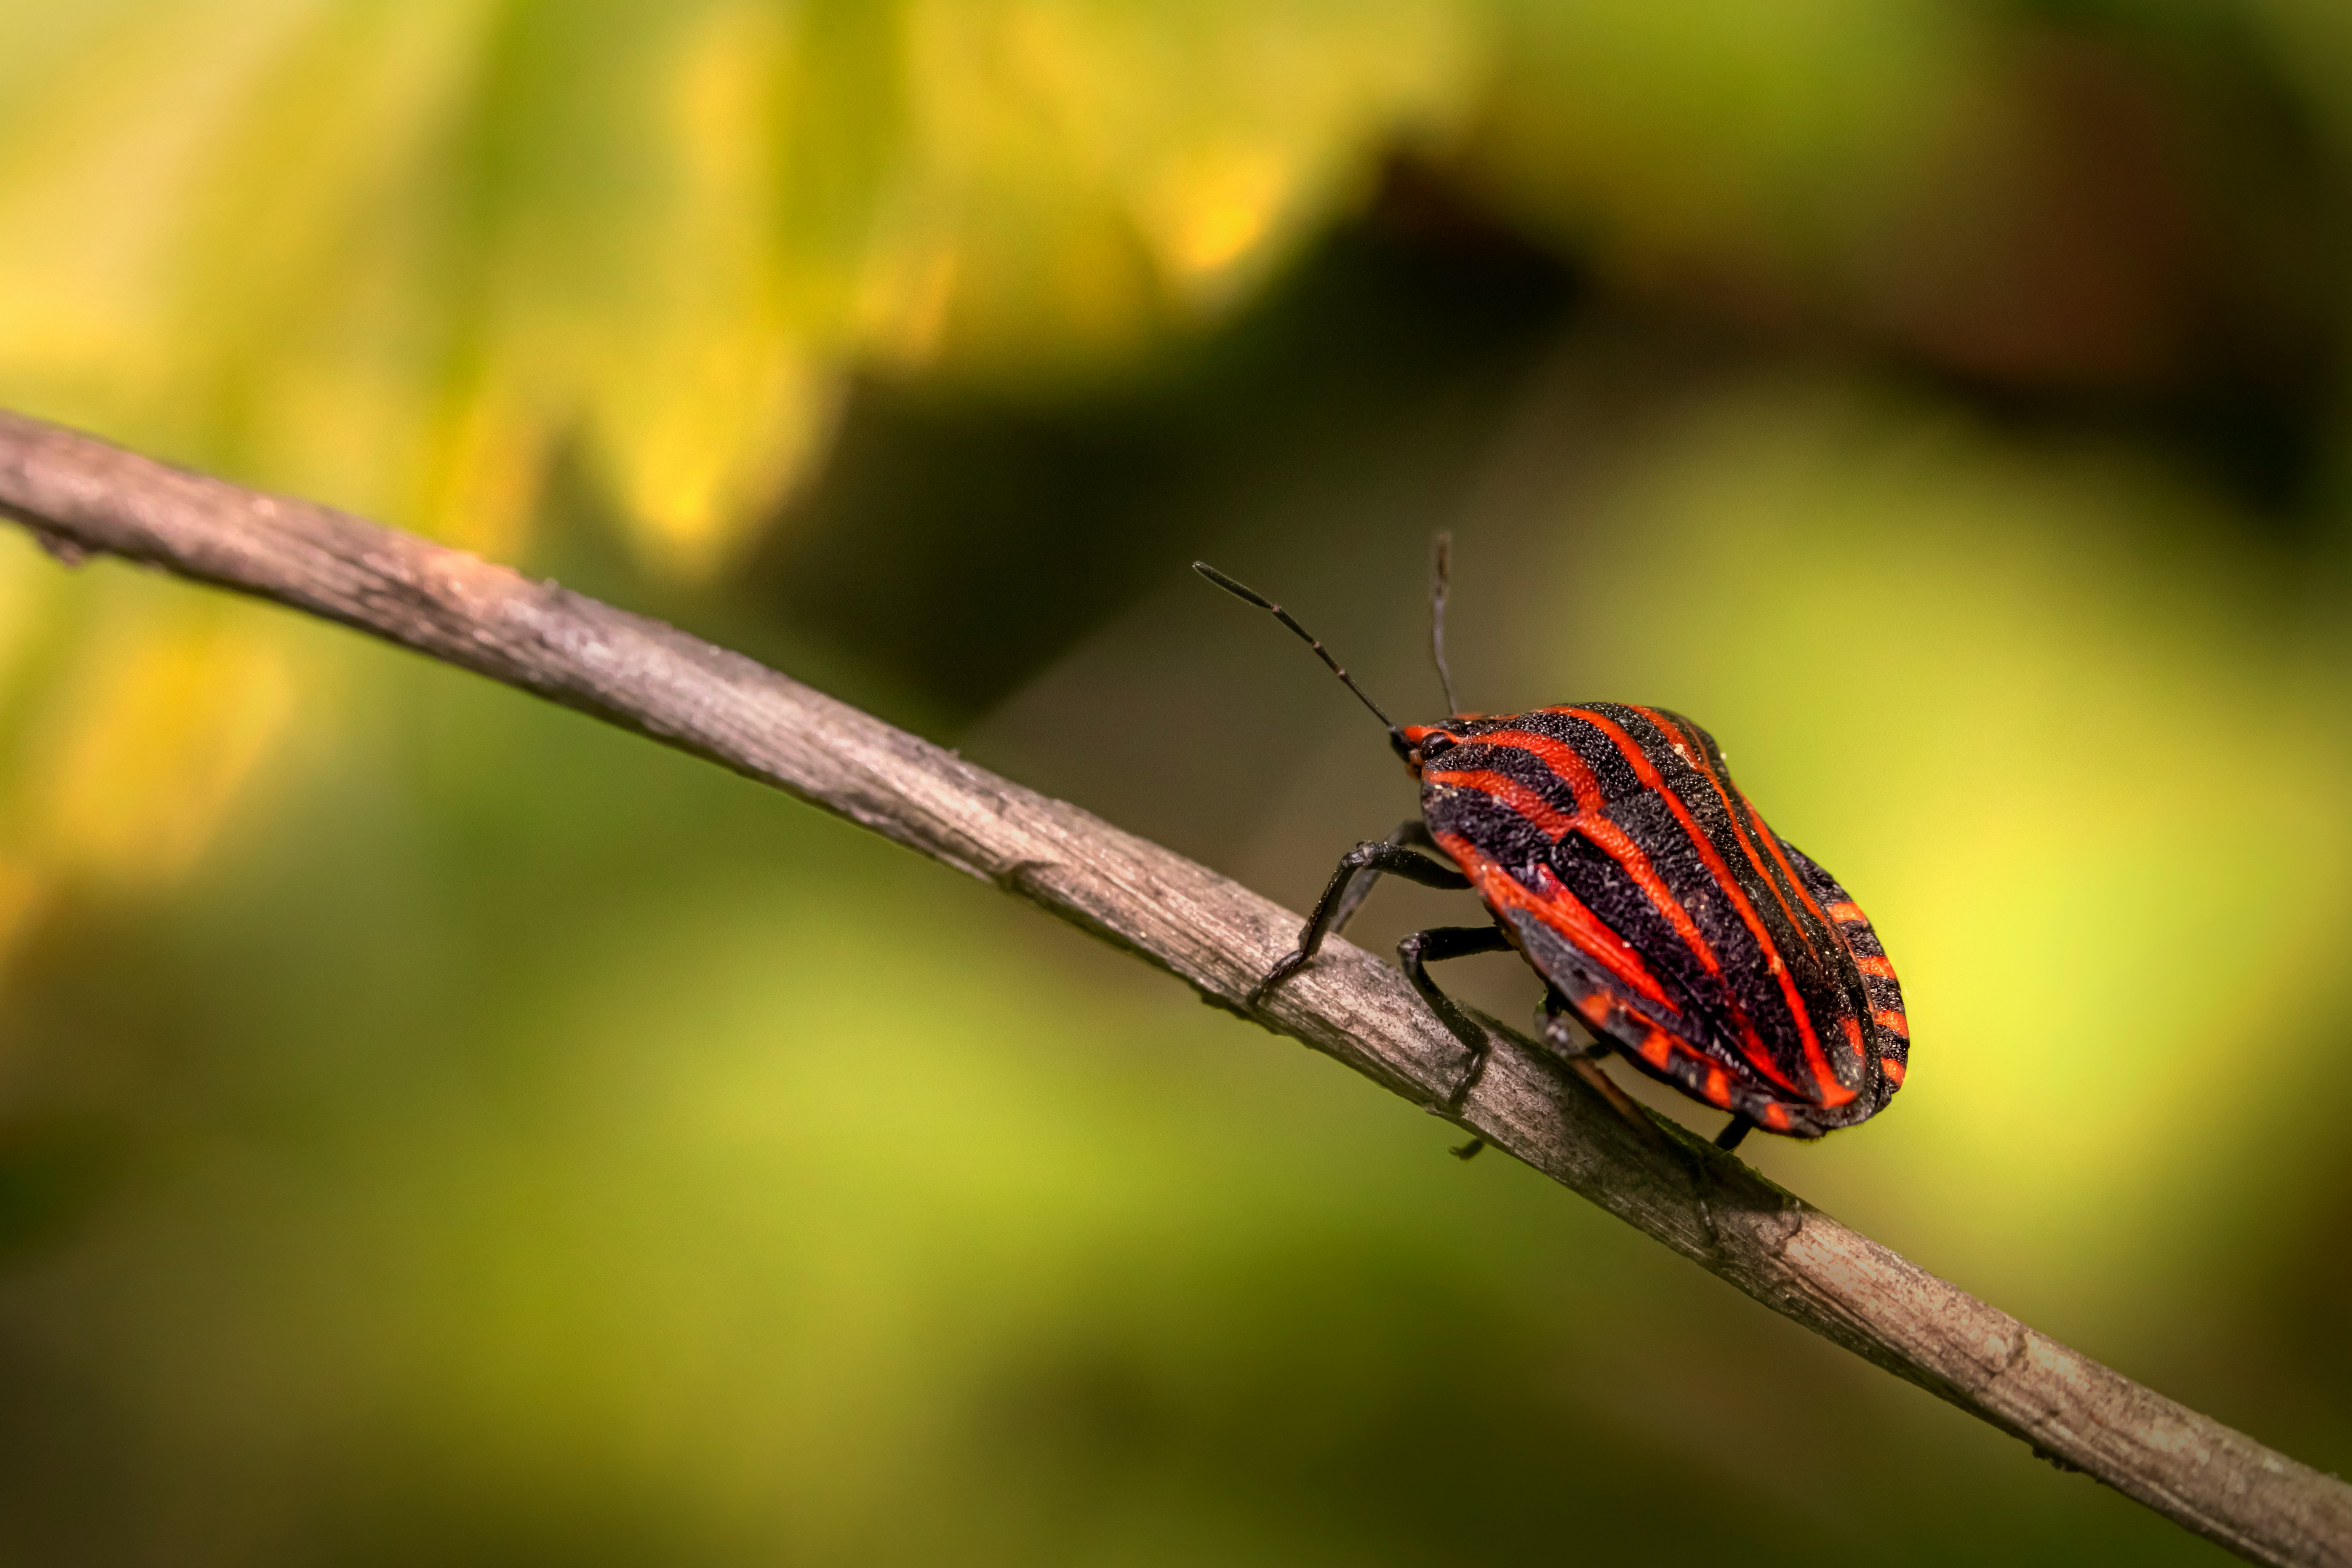 red and black beetle perched on brown stem in close up photography during daytime